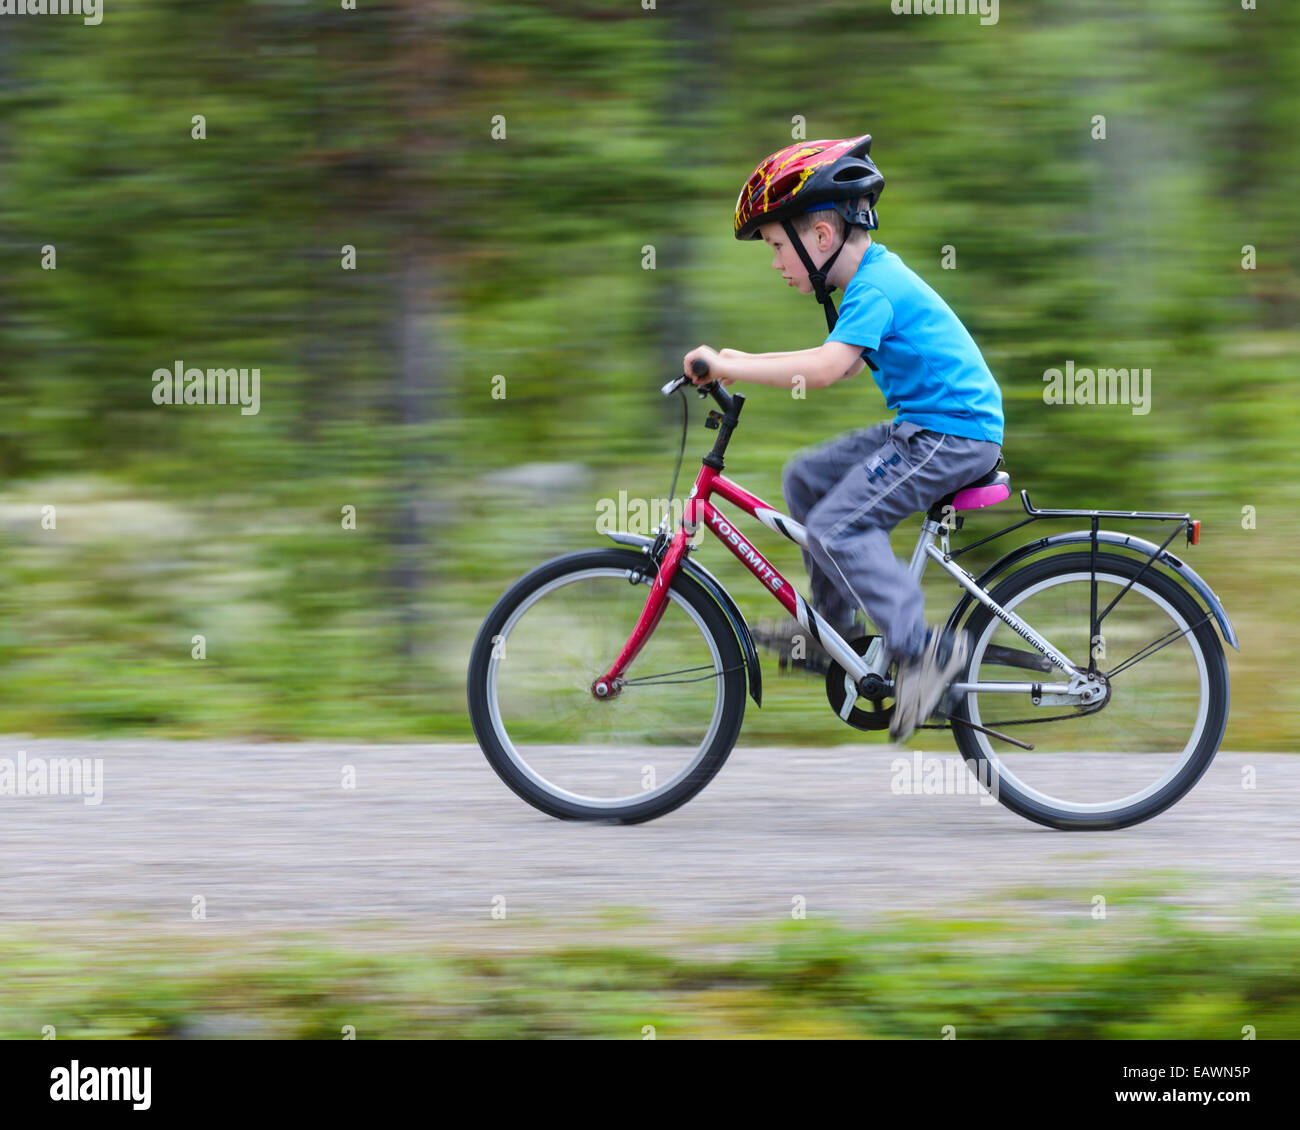 Young boy rides his bicycle down a paved forest path Stock Photo